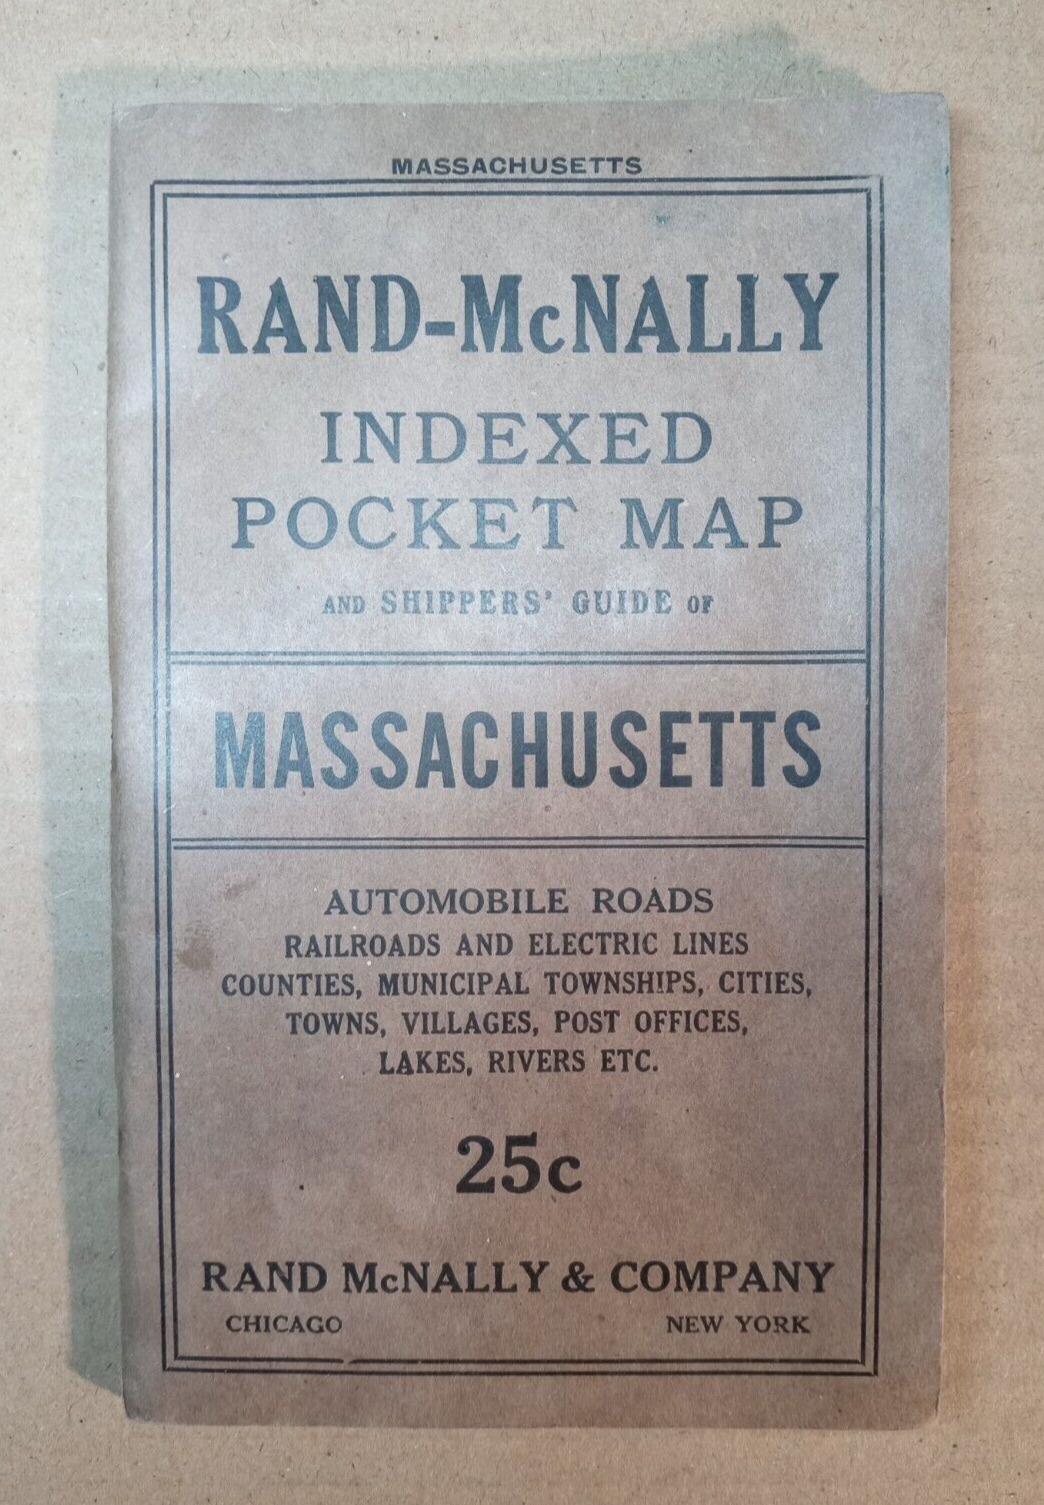 Antique 1917 Rand McNally / Indexed Pocket Map Tourists\' and Shippers\' Guide MA